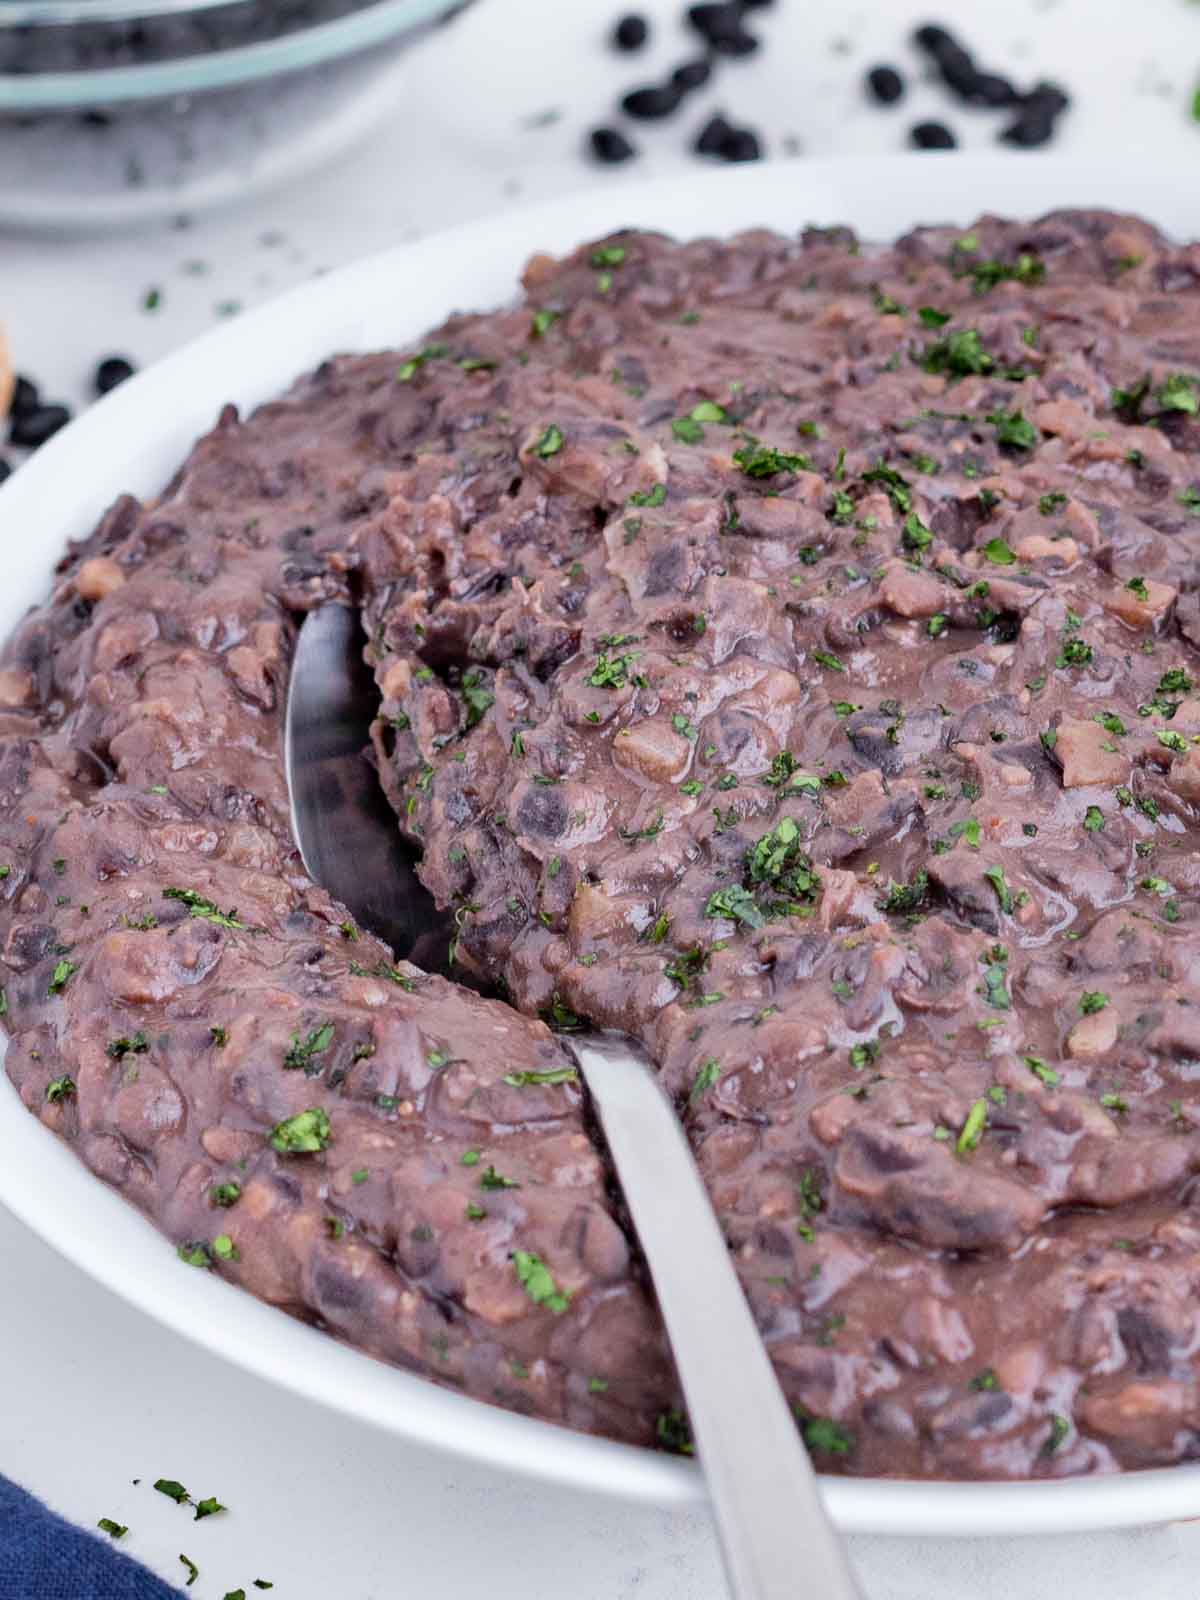 Instant Pot refried black beans take half the time as the traditional types.